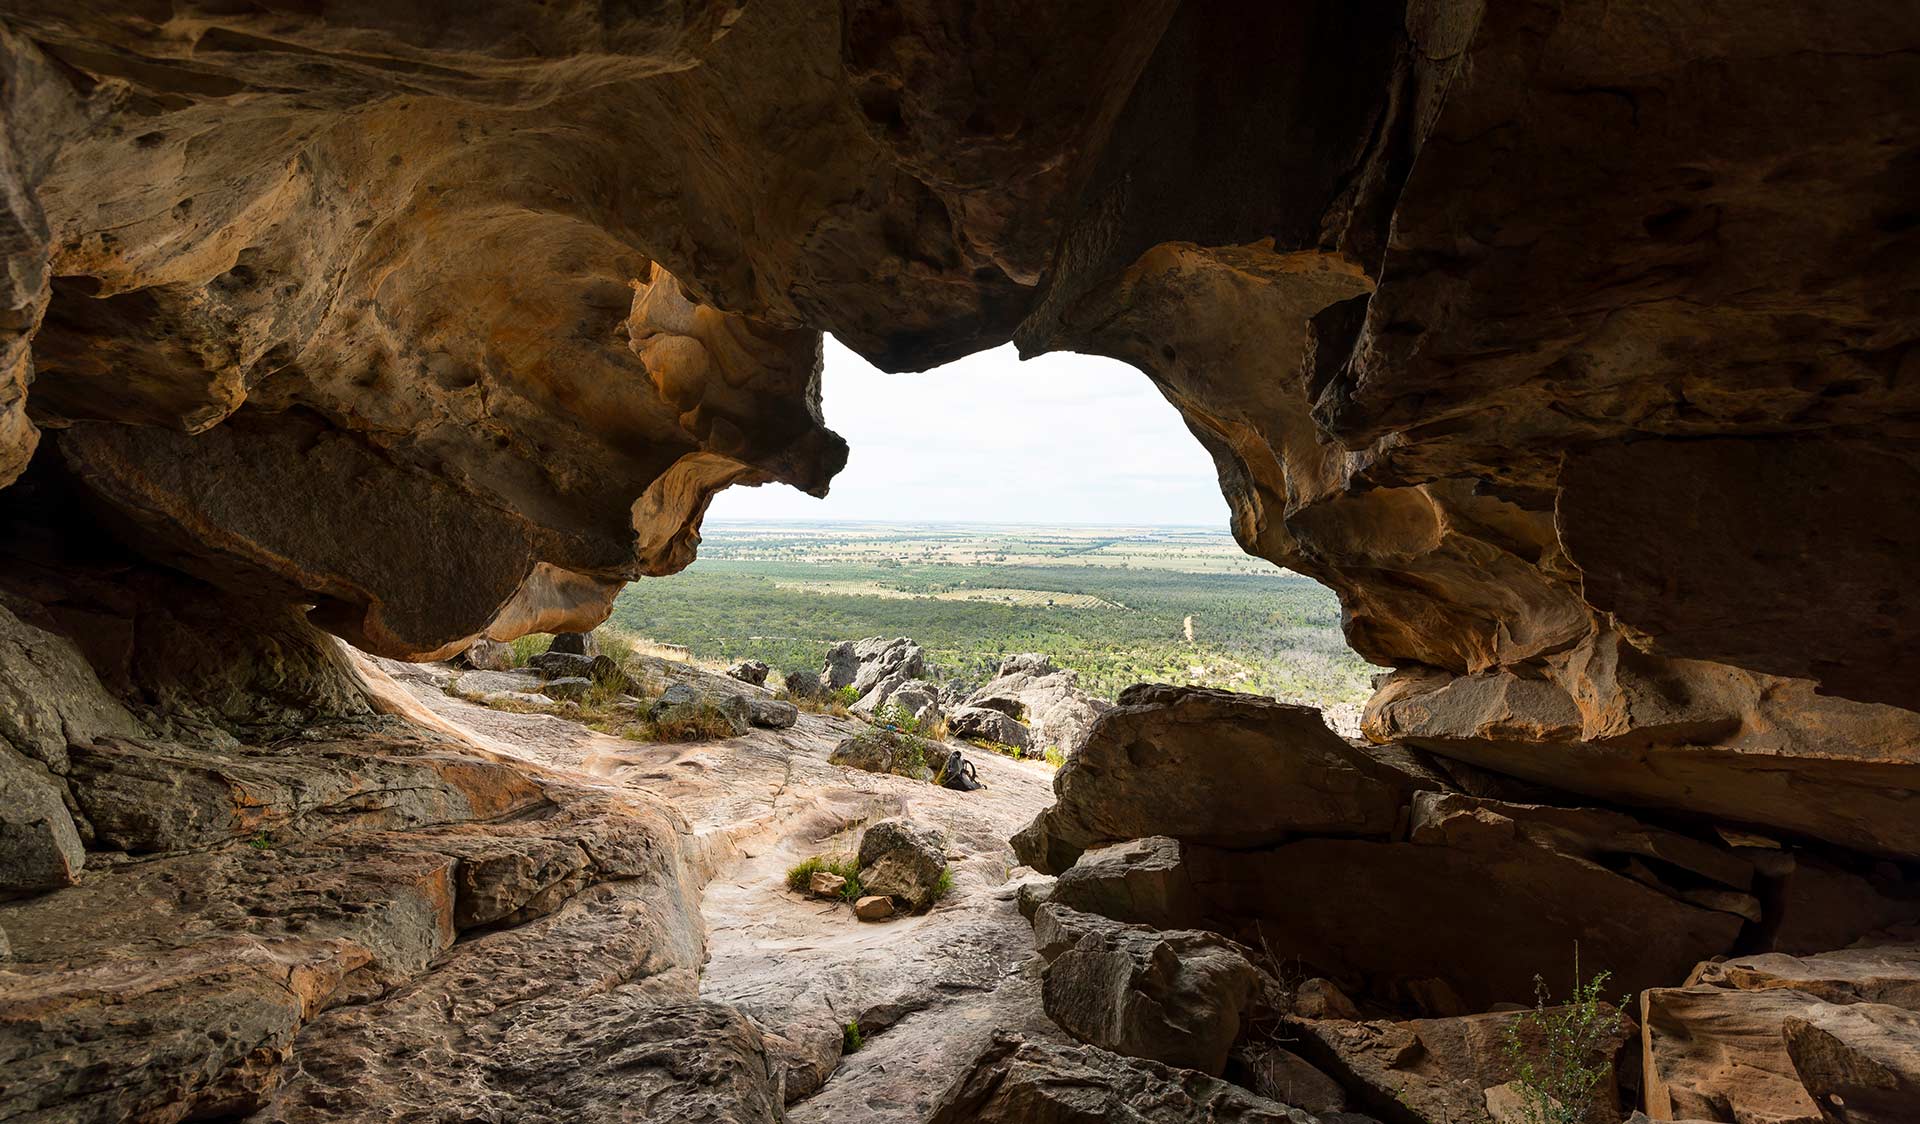 The view of the Wimmera plains through Hollow Mountain in the Grampians National Park.